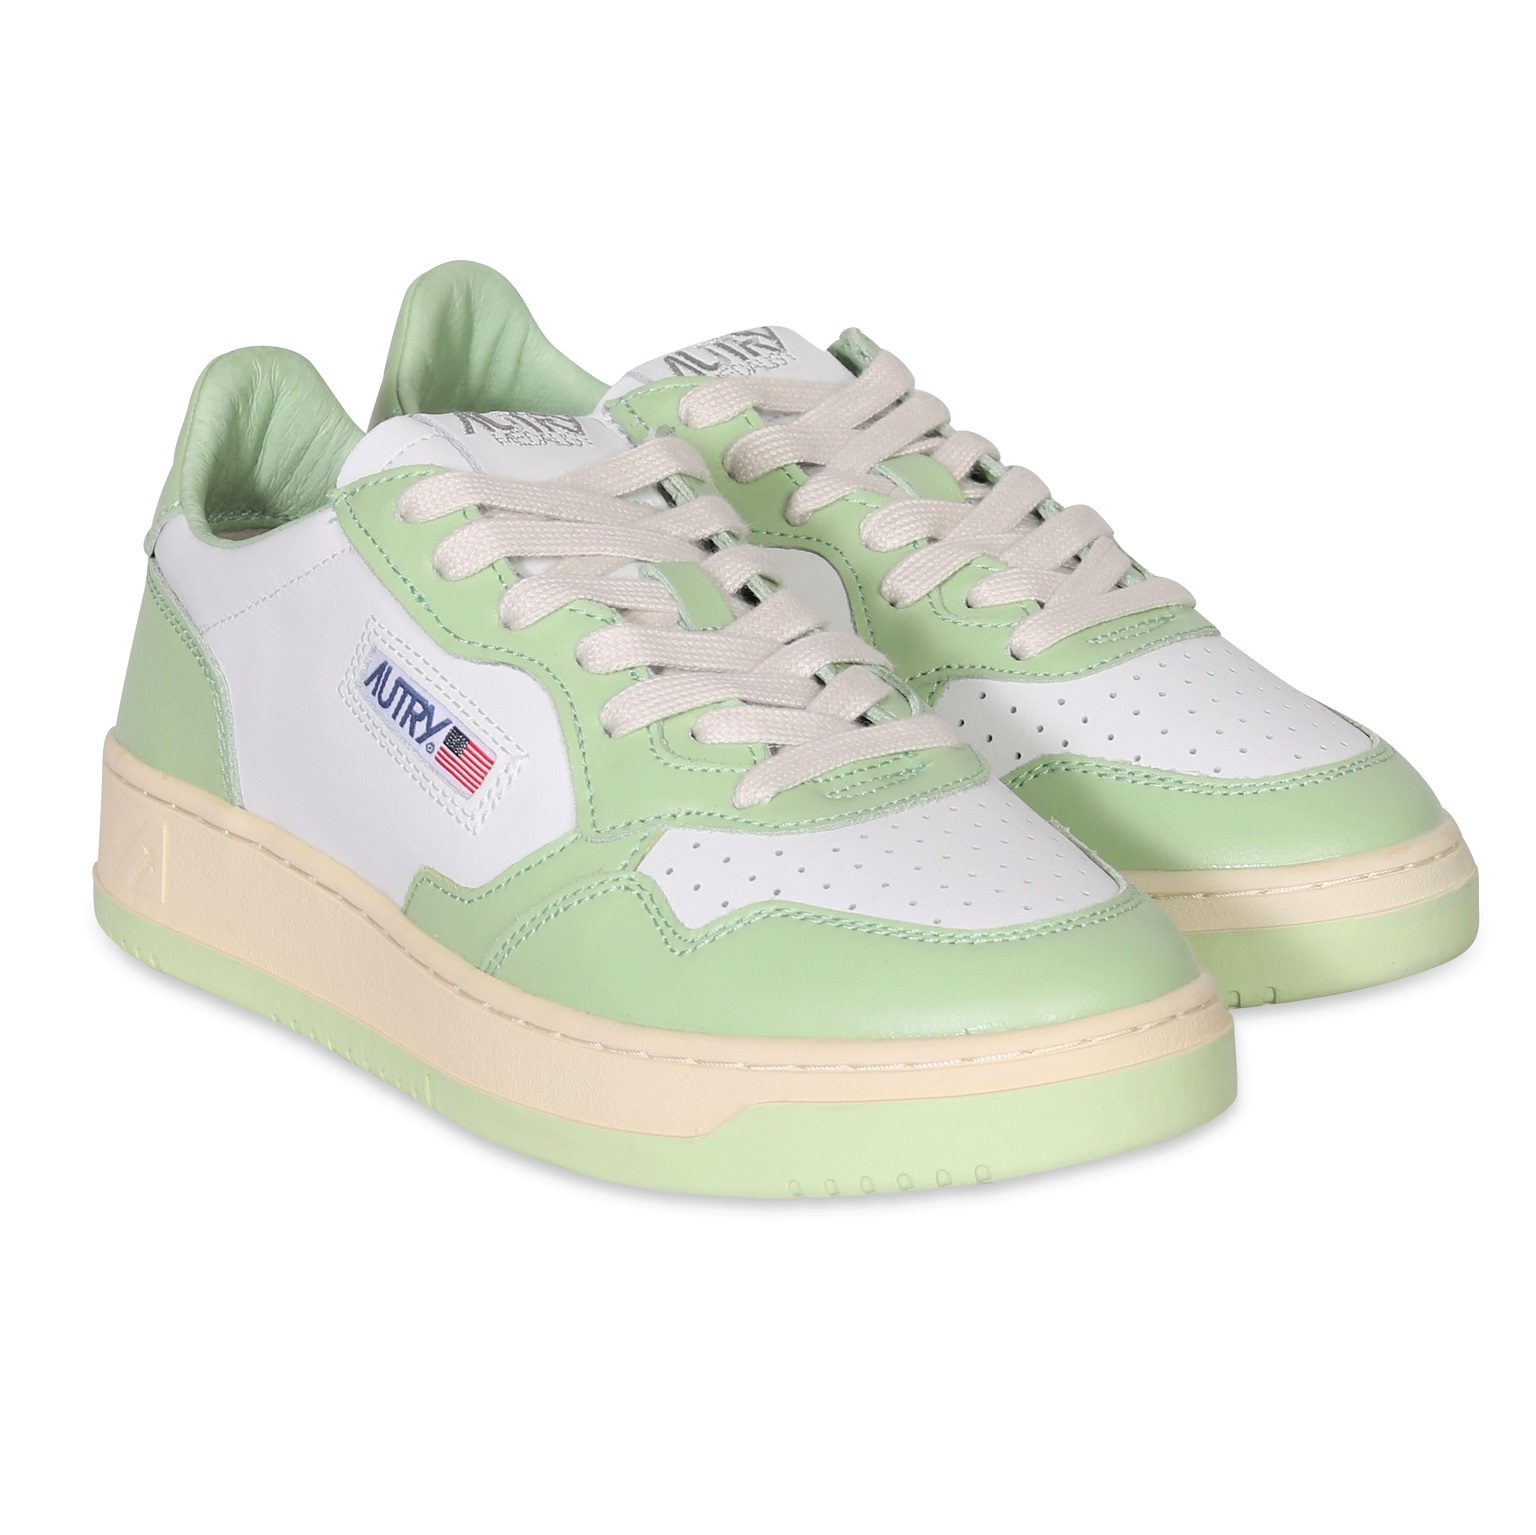 AUTRY ACTION SHOES Low Sneaker White/Nile Green 35